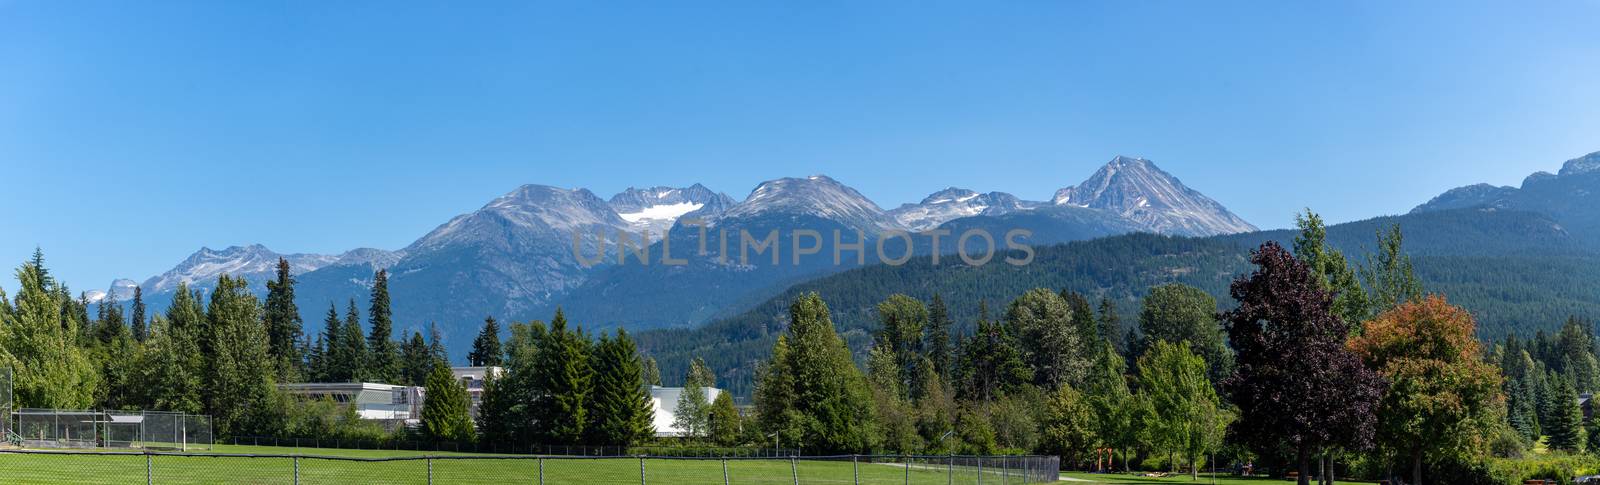 Panorama of beautiful trees and forest in Whistler/Blackcomb, Wedgemont Mountain and the Singing Pass Mountain Range in British Columbia, Canada.